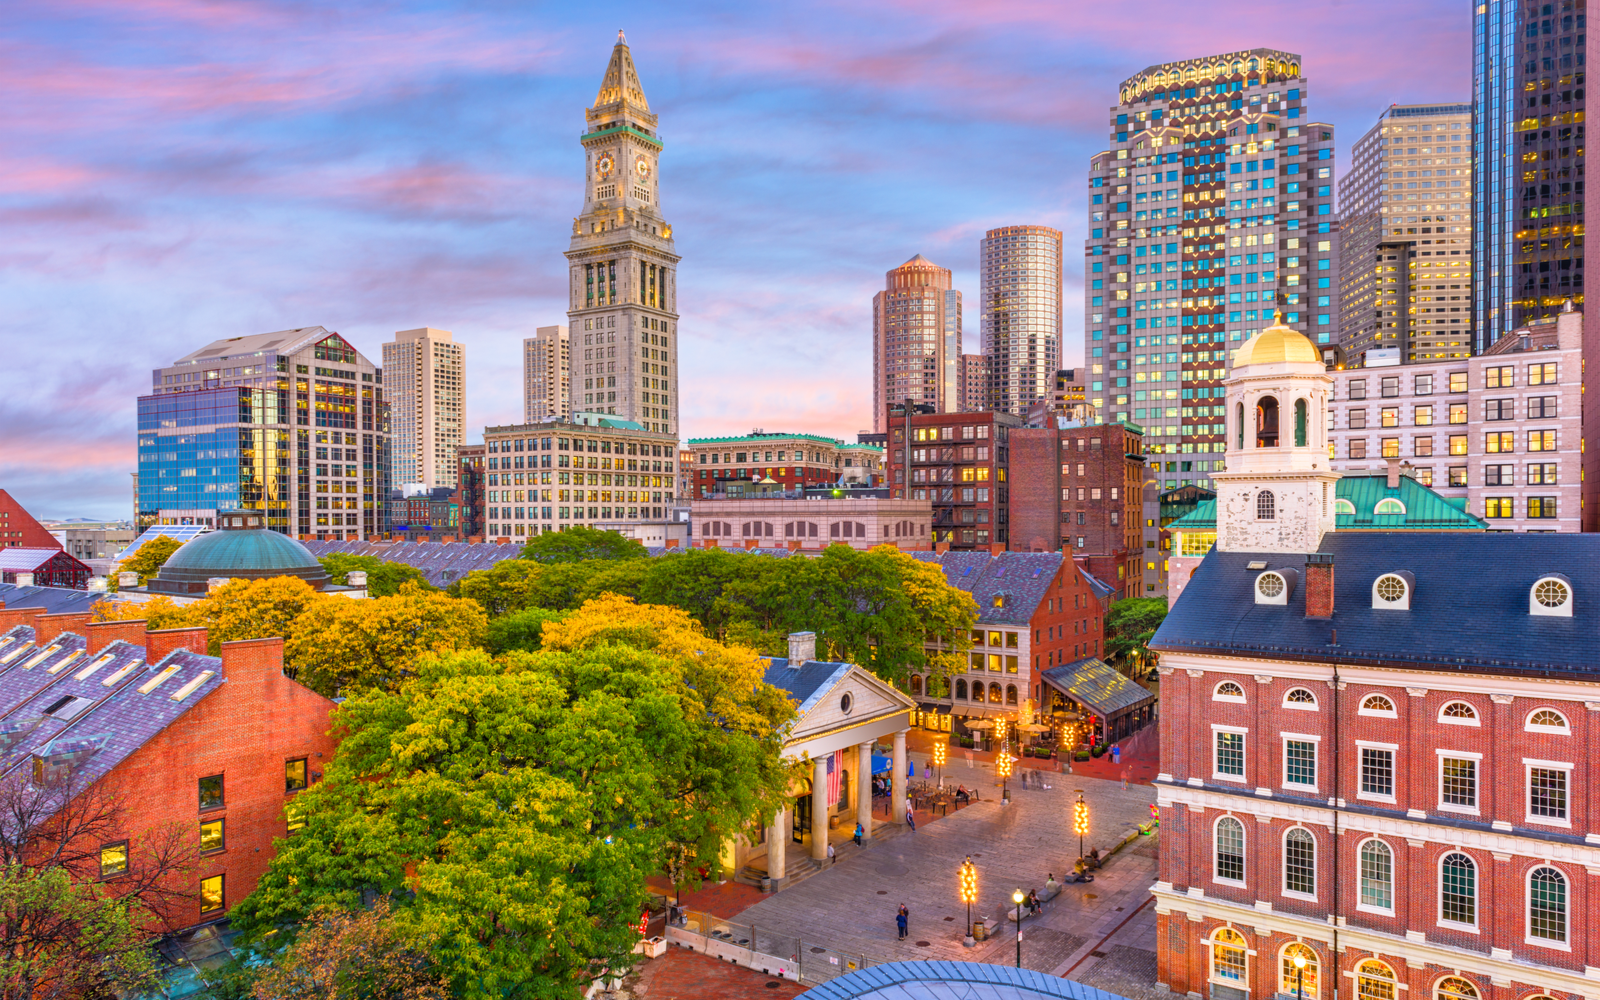 Skyline of the downtown area in Boston, one of the most beautiful cities in the US, pictured at sunrise